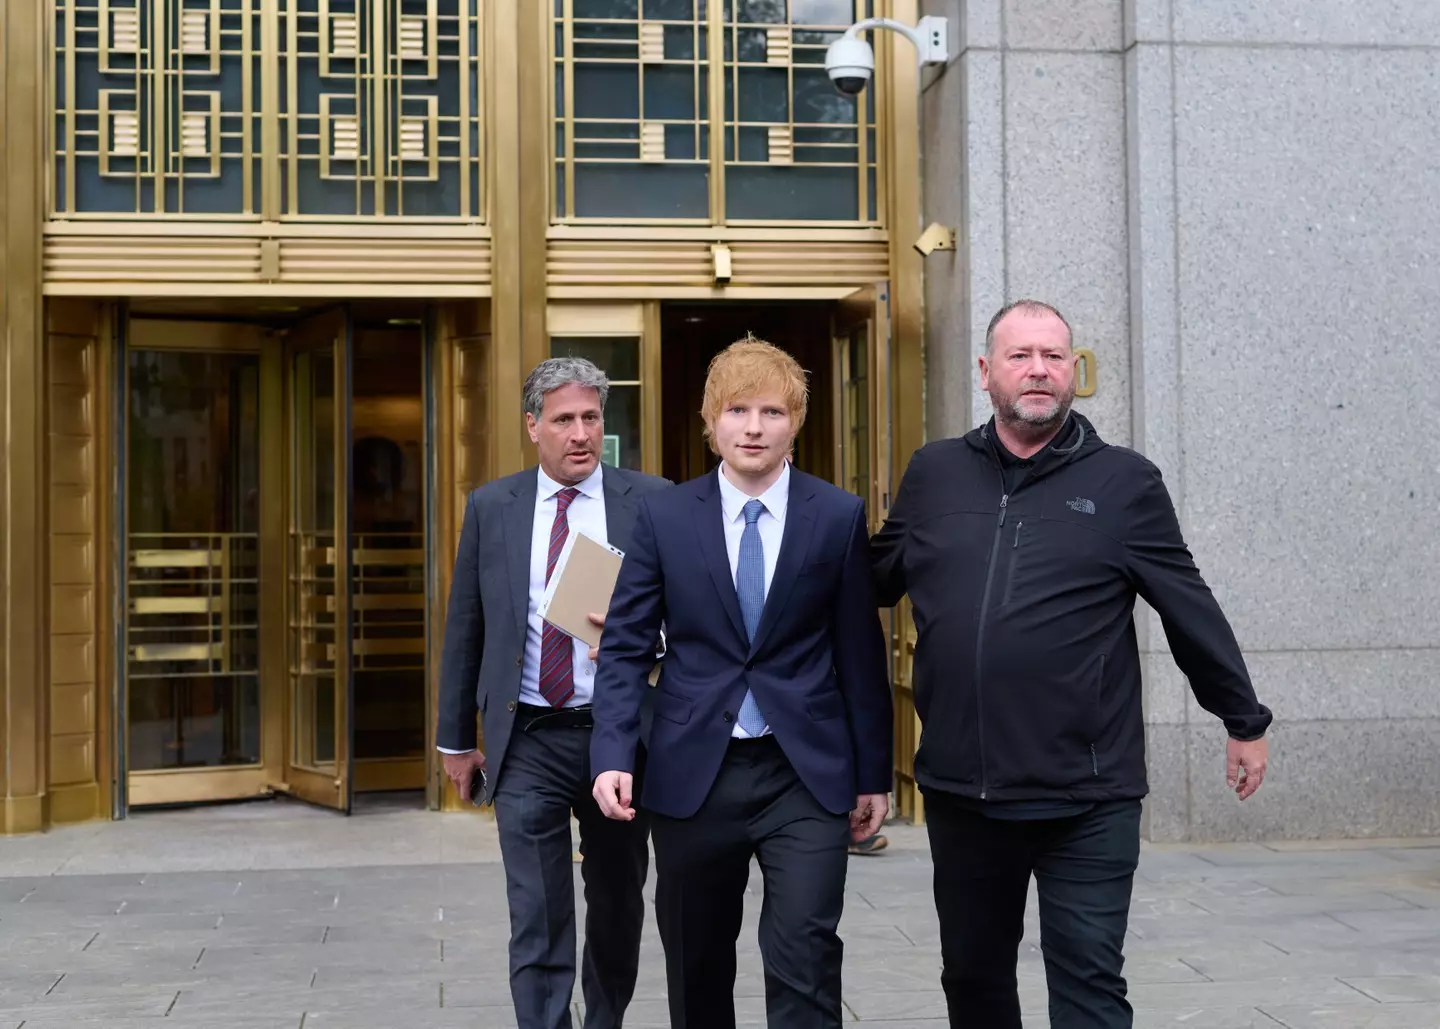 Ed Sheeran has insisted that 'most songs fit over most songs' as he defends himself of copying Marvin Gaye song in court.